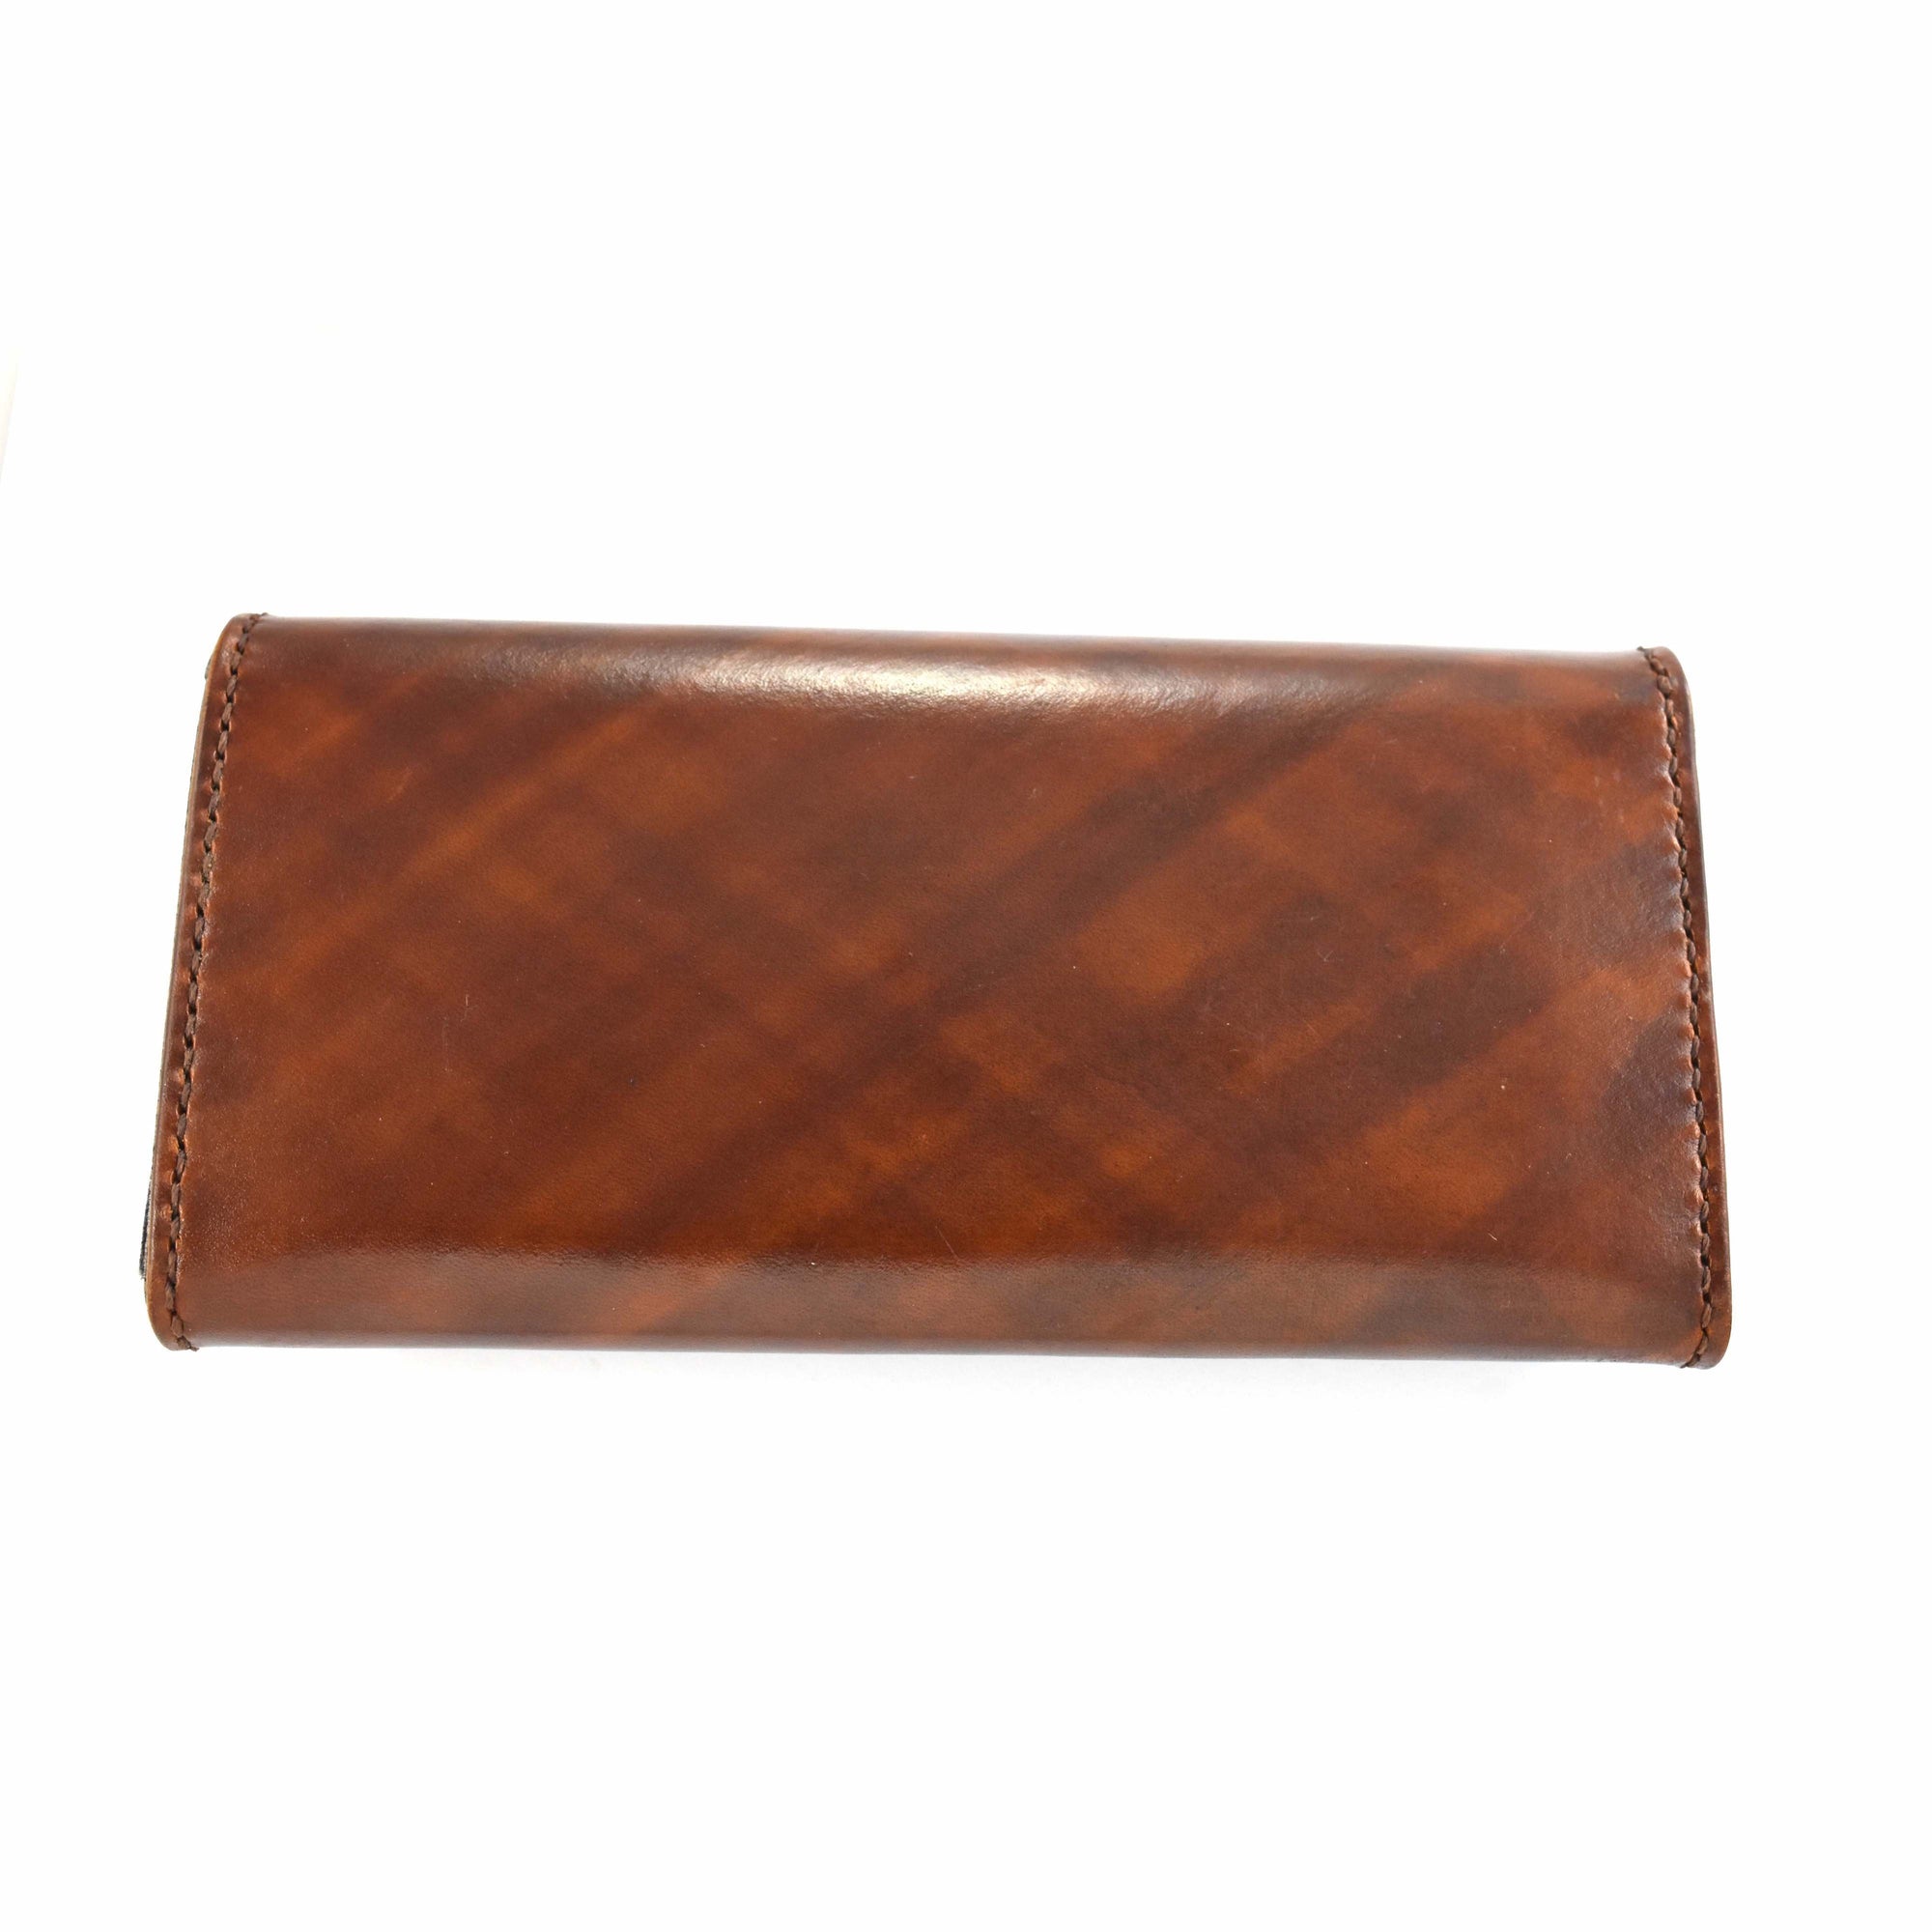 Conifer Couple Clutch Wallet - Tree Planted with Purchase - Artisan Goods   4139 - handmade by Beth Millner Jewelry